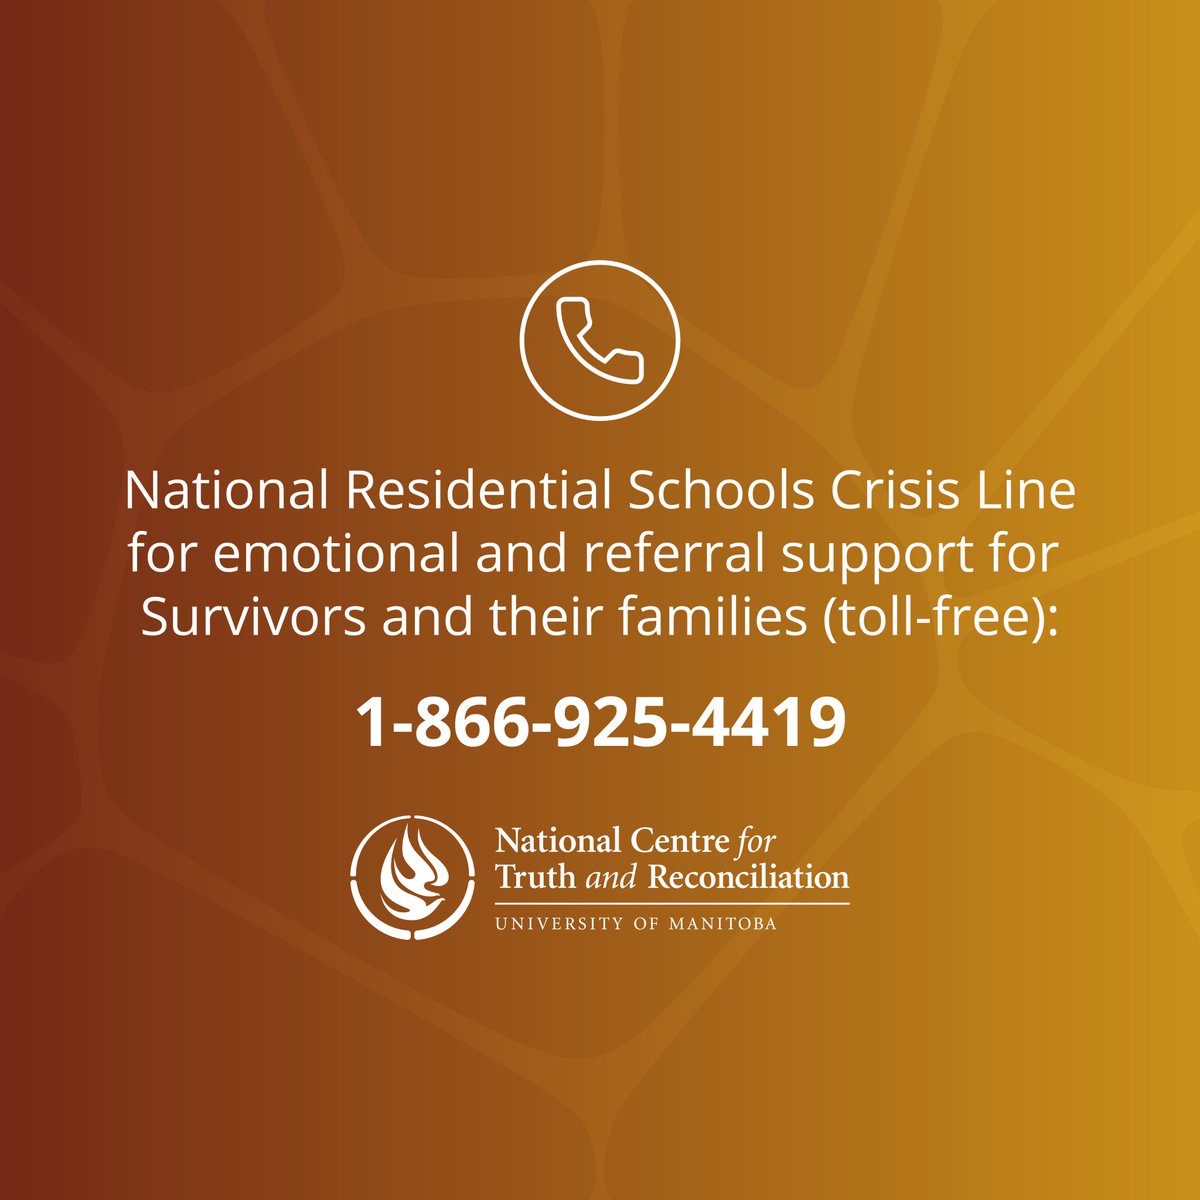 For immediate emotional support, 24 hours a day, 7 days a week, Survivors and their families are encouraged to contact the National Residential Schools Crisis Line. Call toll-free: 1-866-925-4419